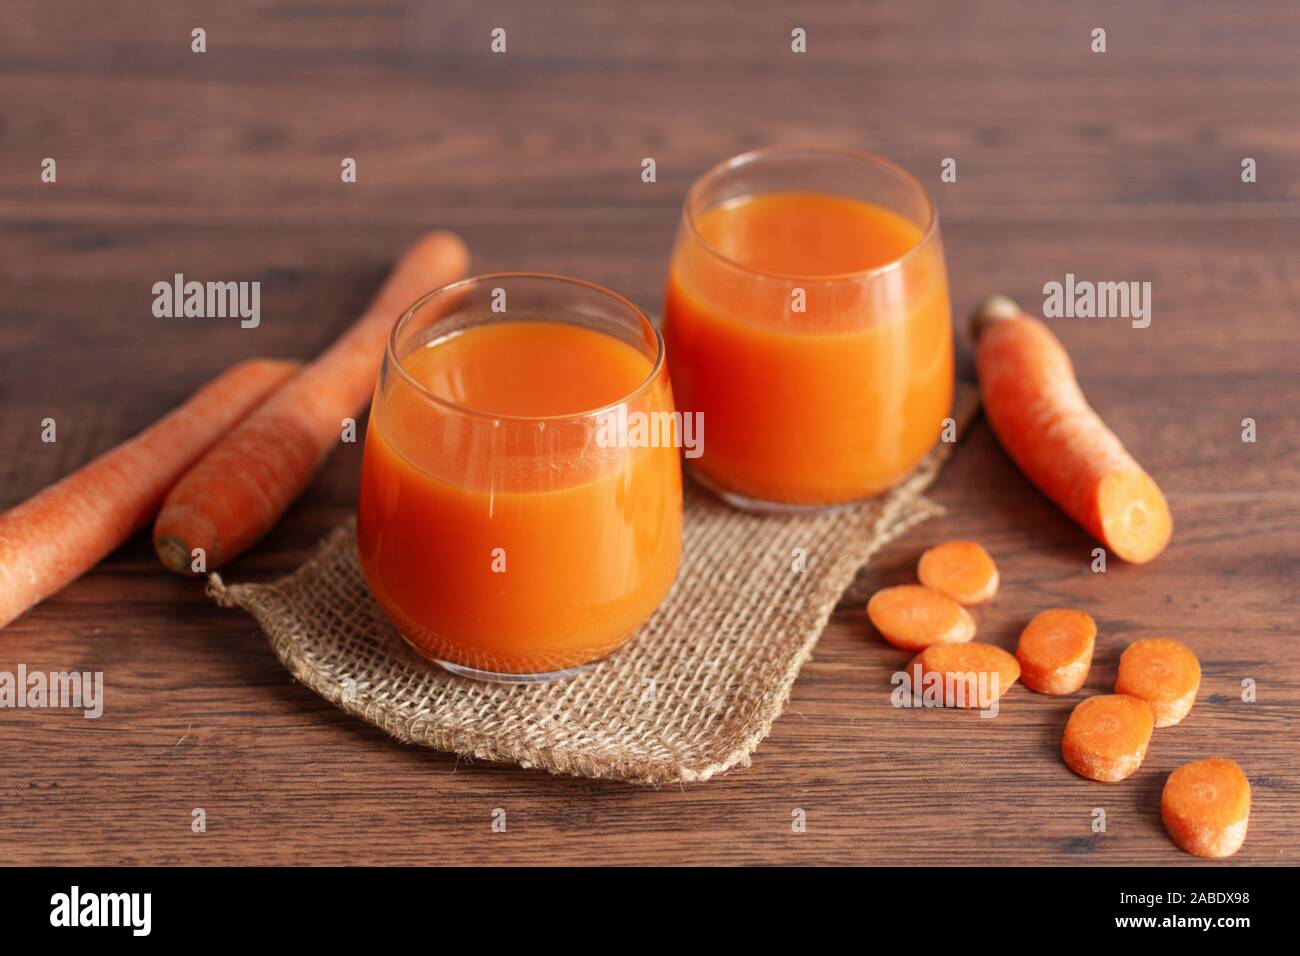 Healthy carrot juice in a glass and fresh carrots on a table. Healthy dieting drink in a glass on wooden table background. Stock Photo